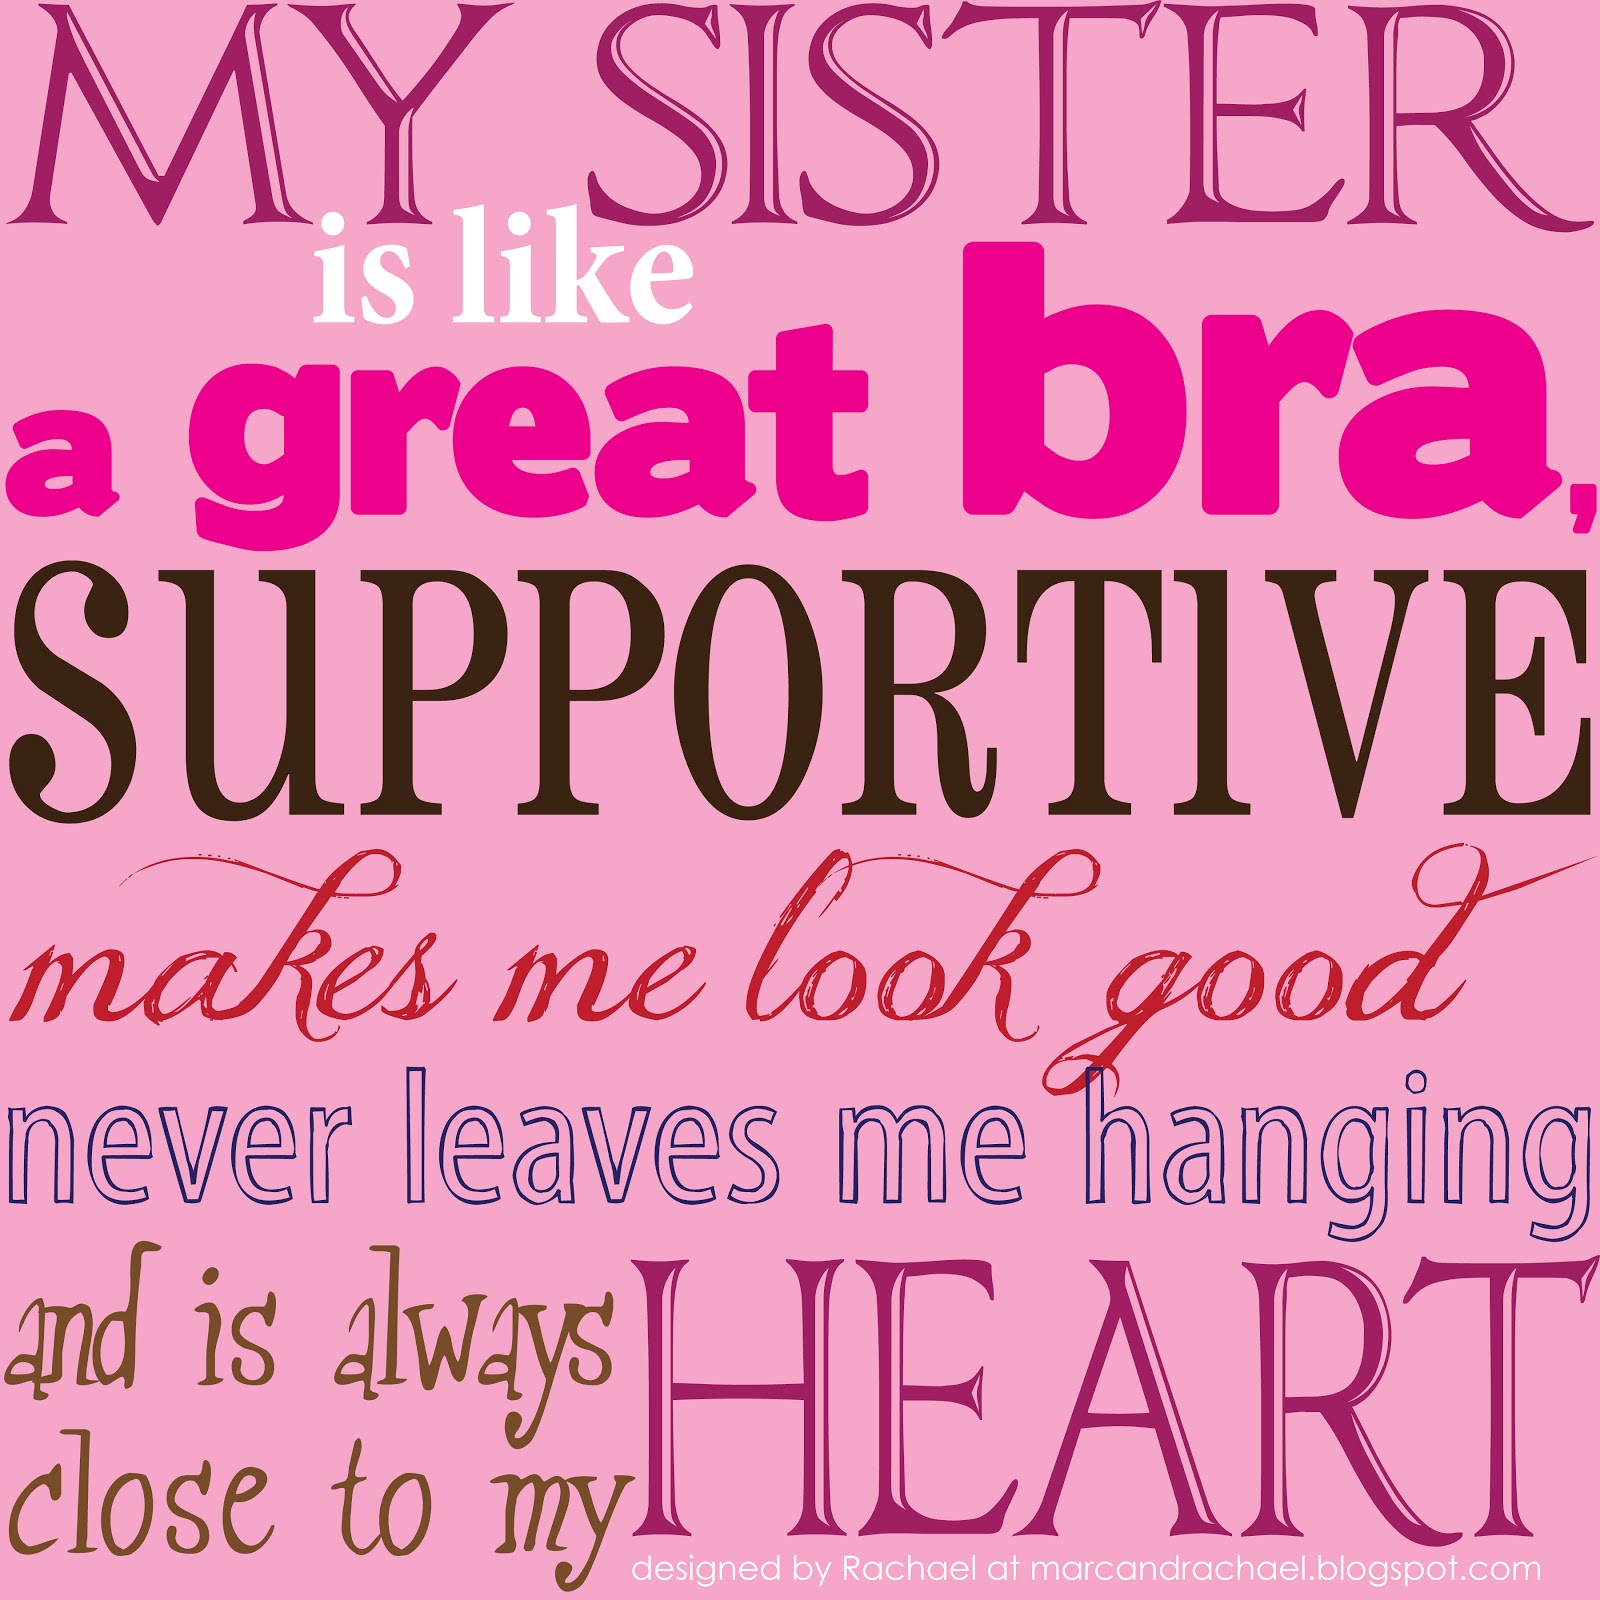 My sister. Картинка my sister. My Lovely sister. My sister and Family Word Wallpaper. I m like my sister